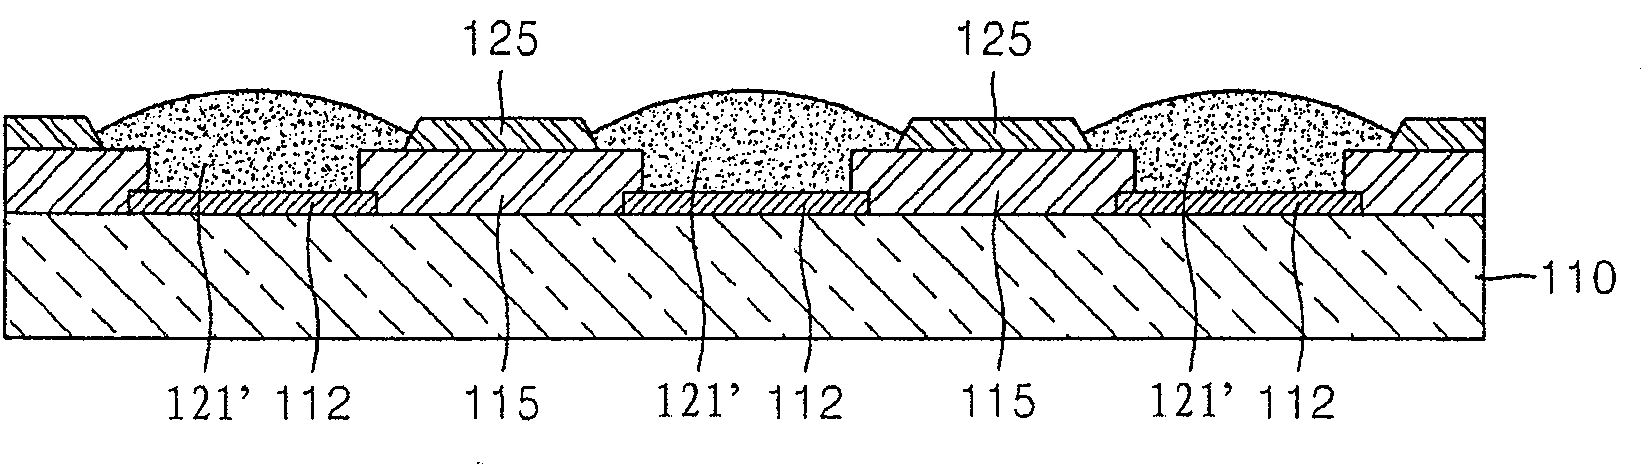 Organic electroluminescent device and its method of manufacture